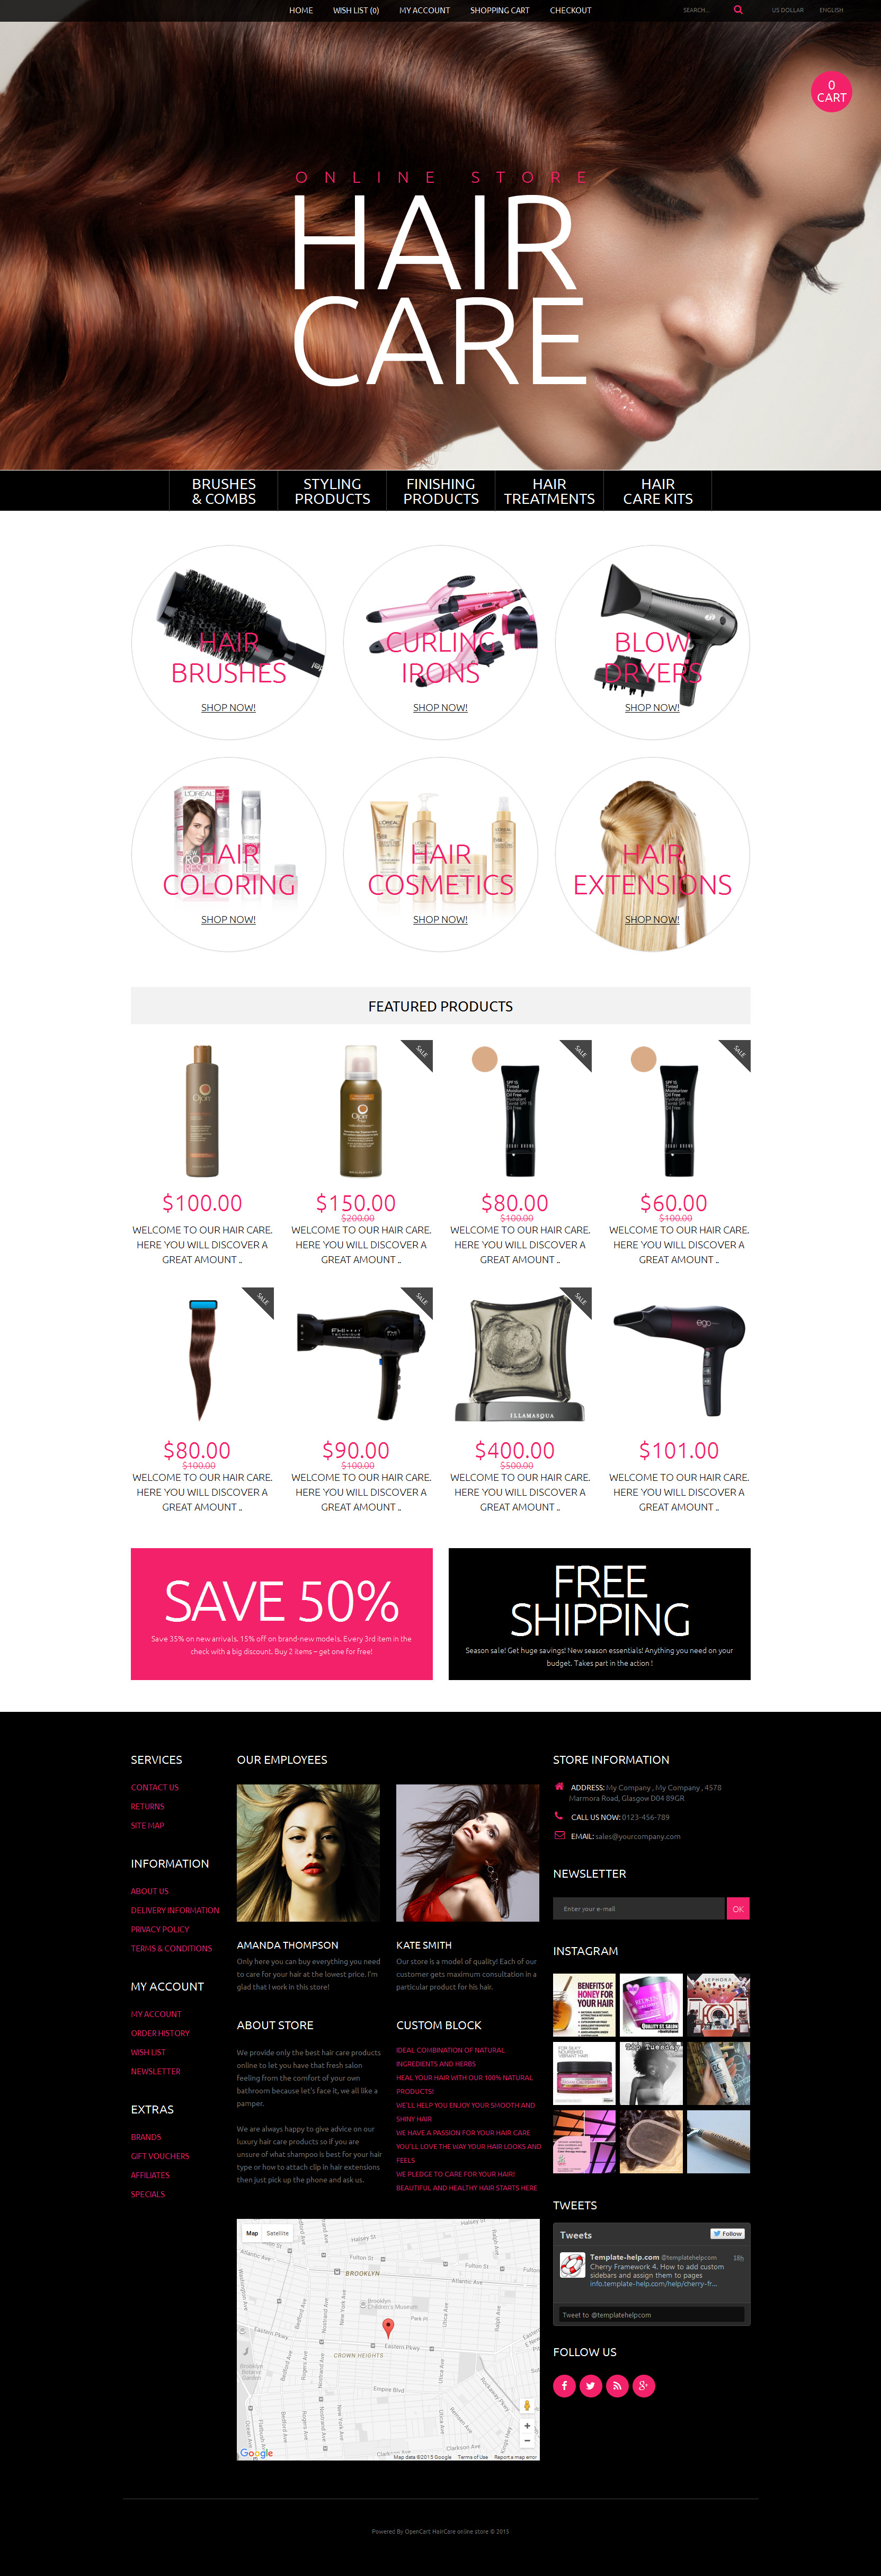 Hair Care OpenCart Template